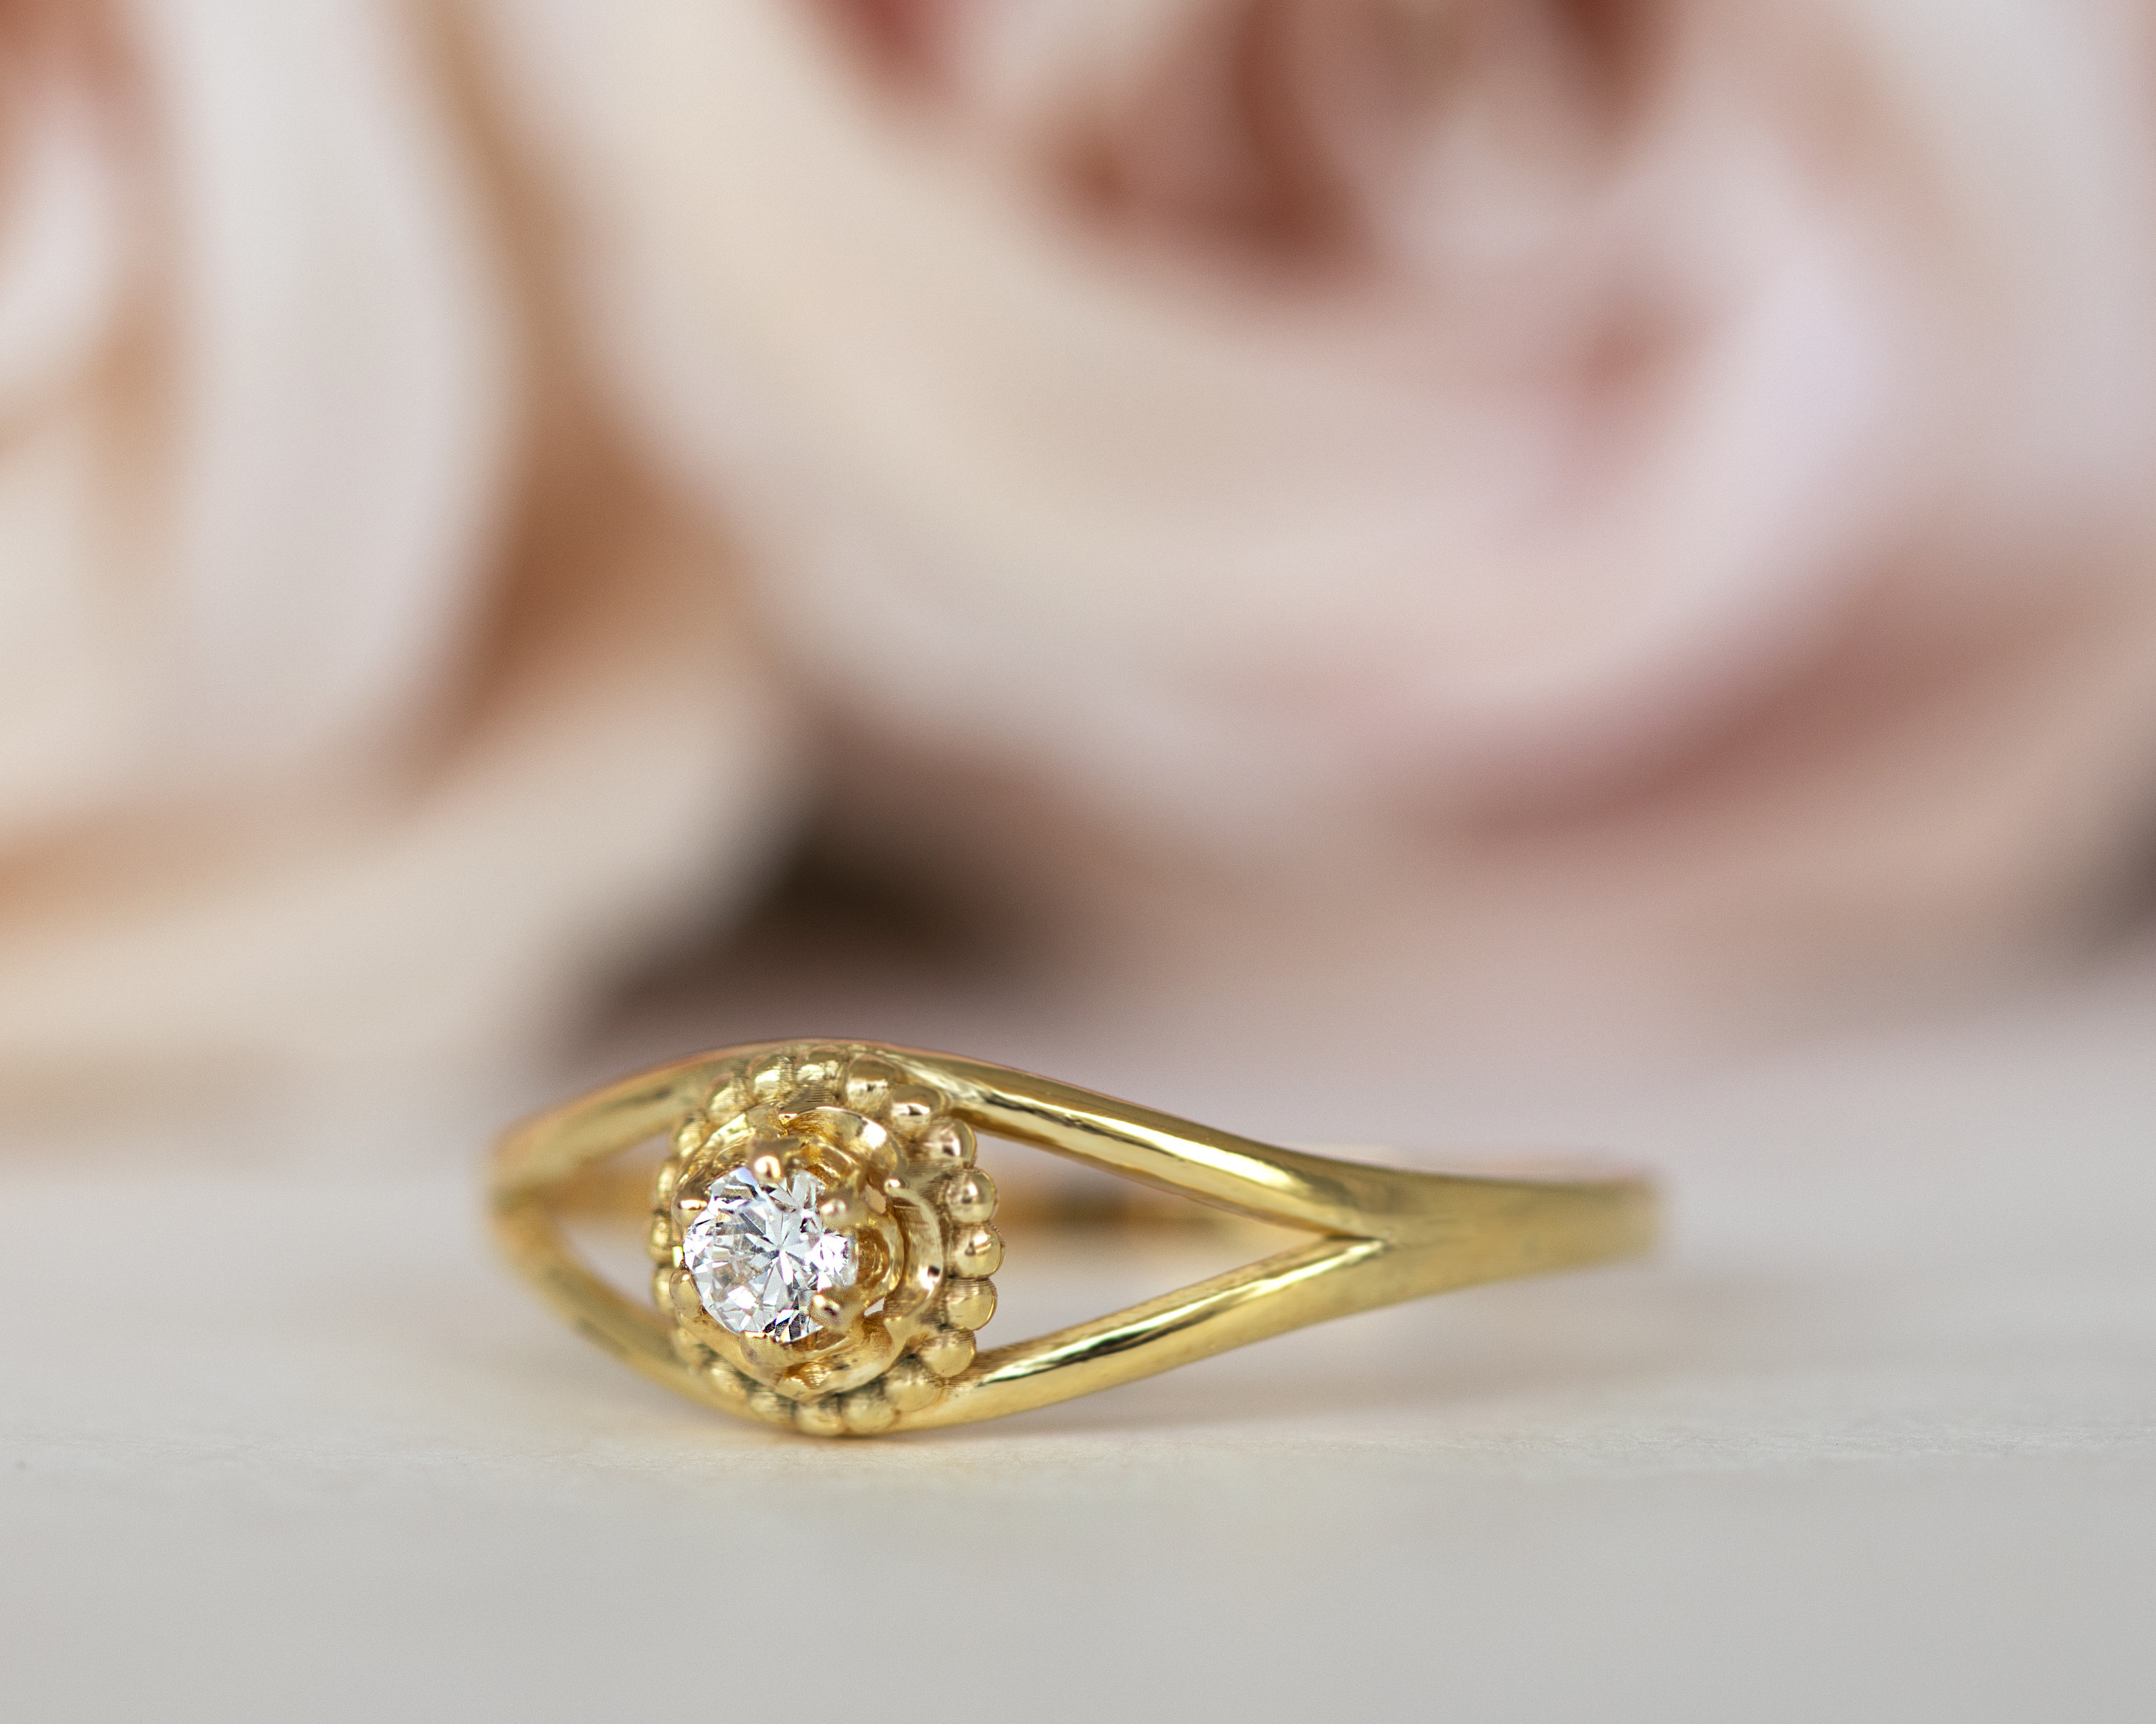 Vintage Diamond Engagement Ring, Gold Unique Small Diamond, Solitaire Ring